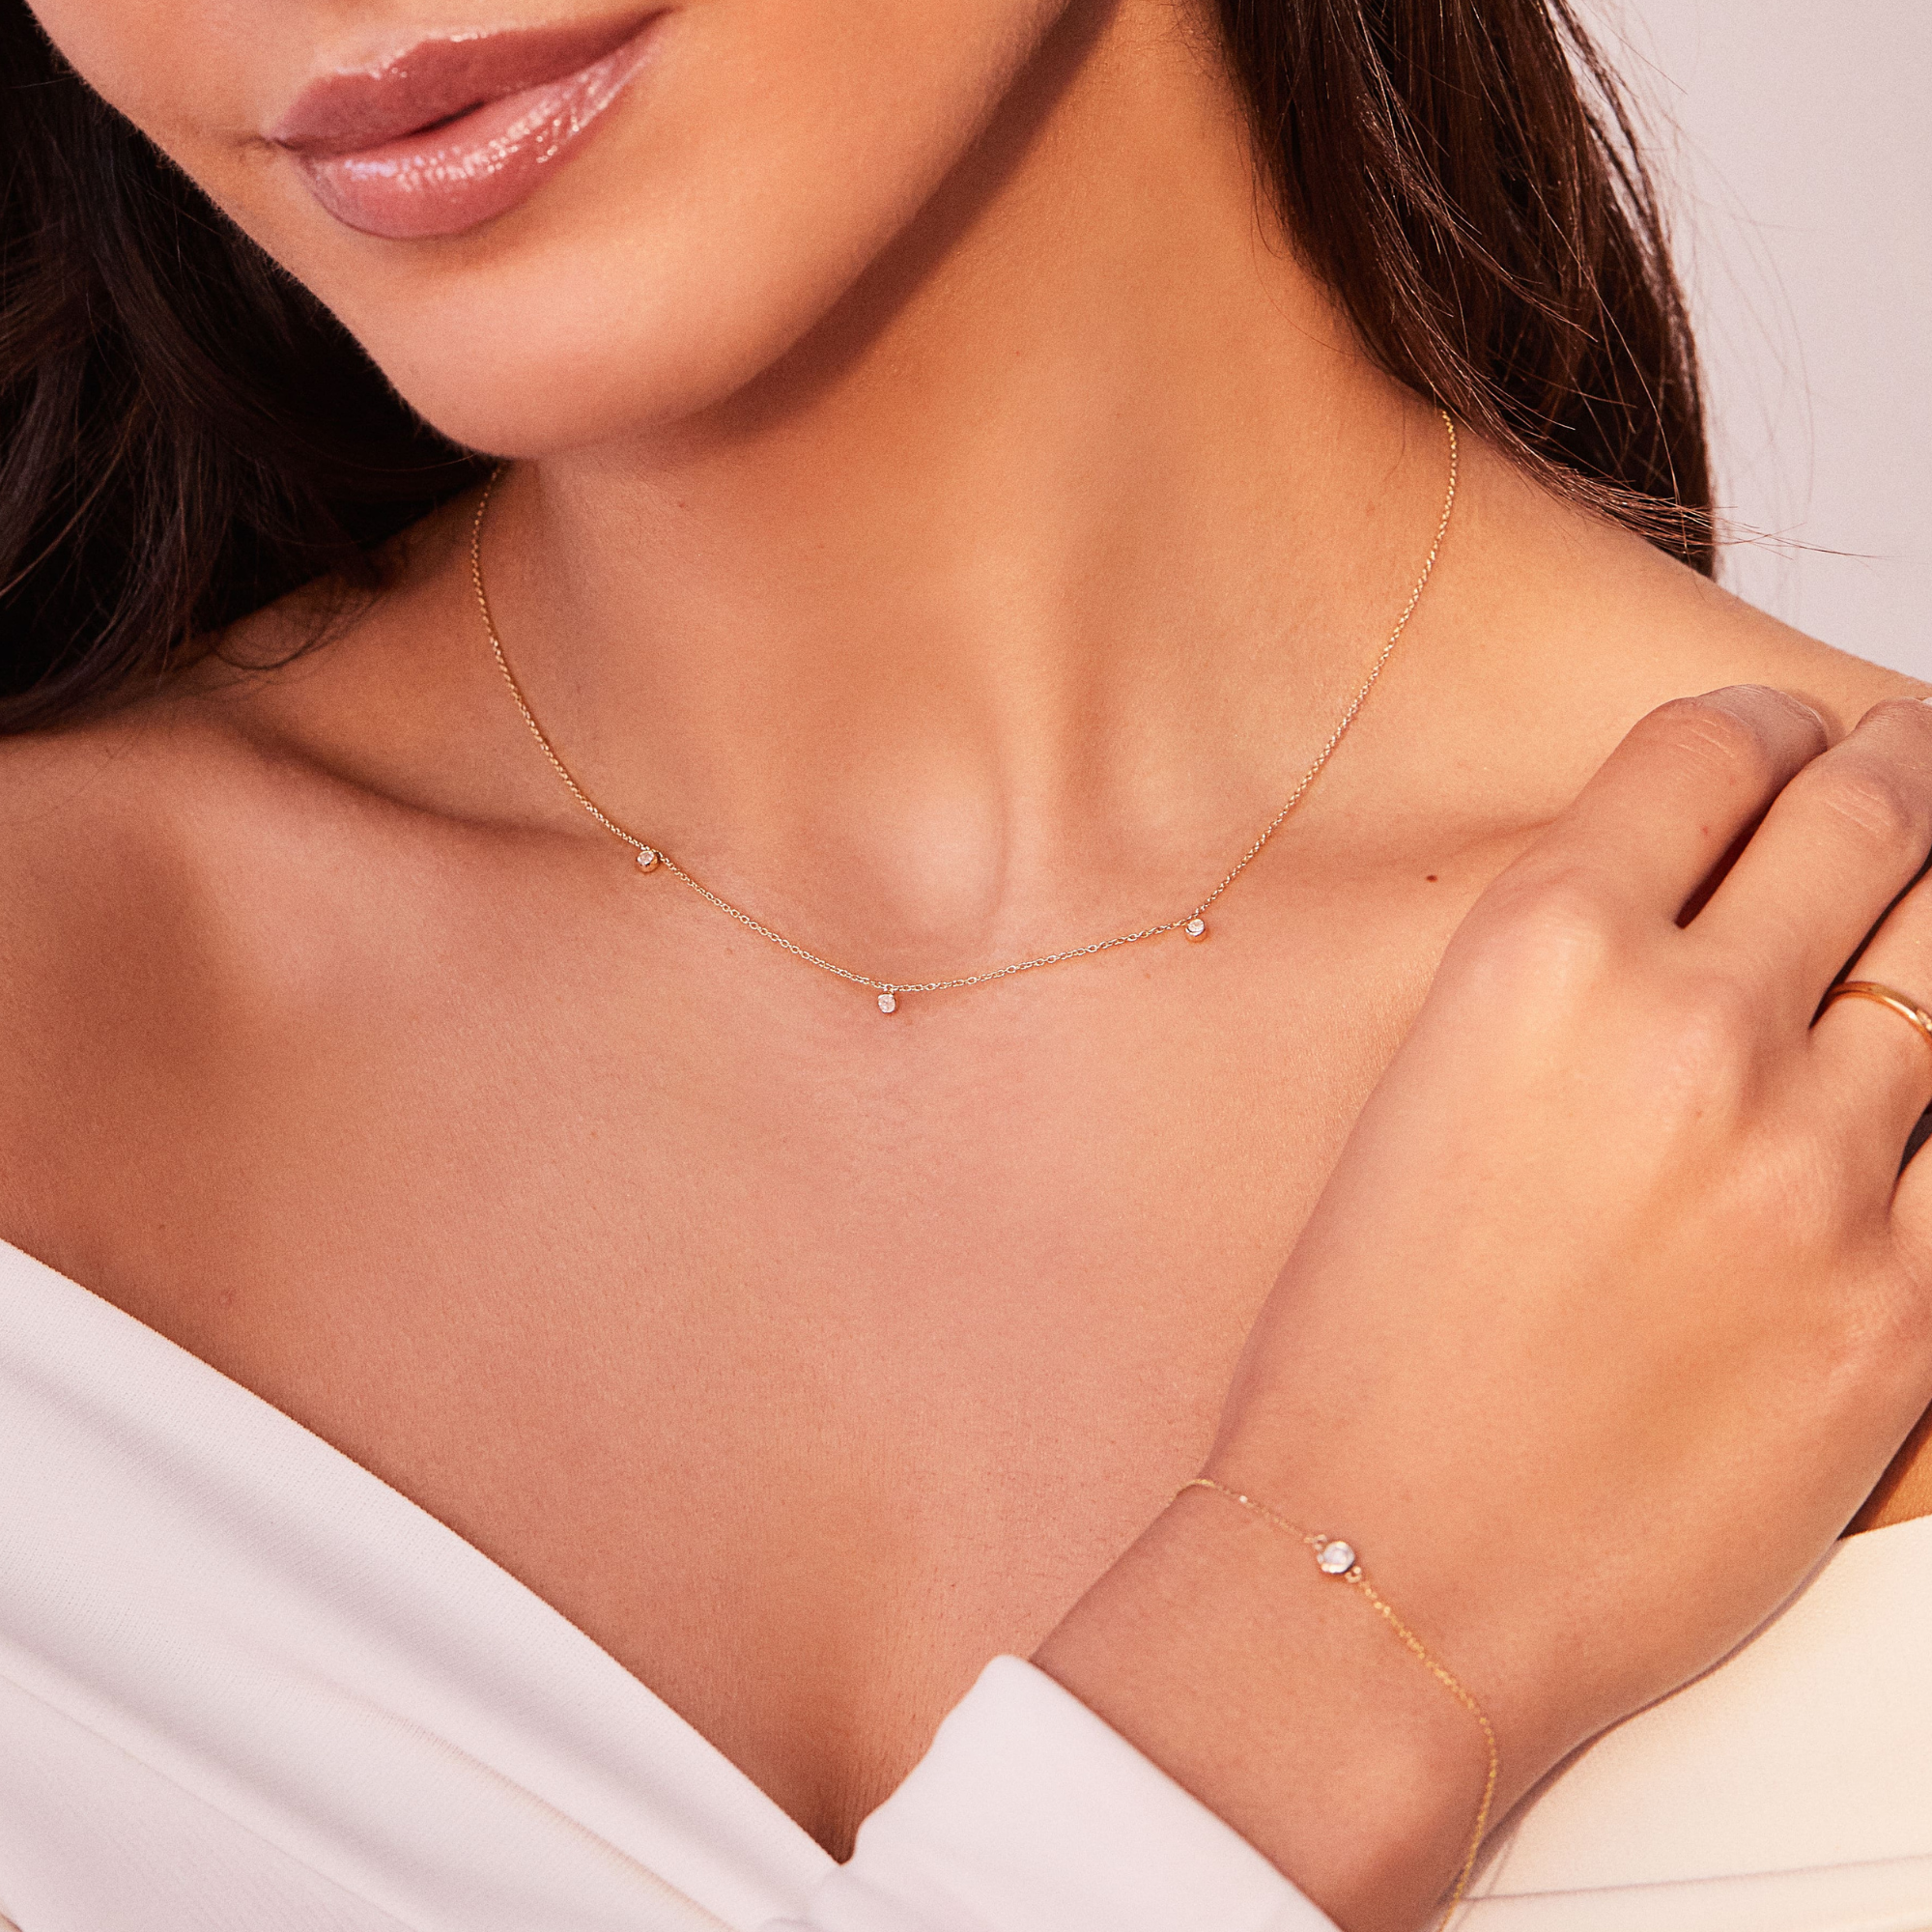 Solid White Gold Diamond Drop Necklace